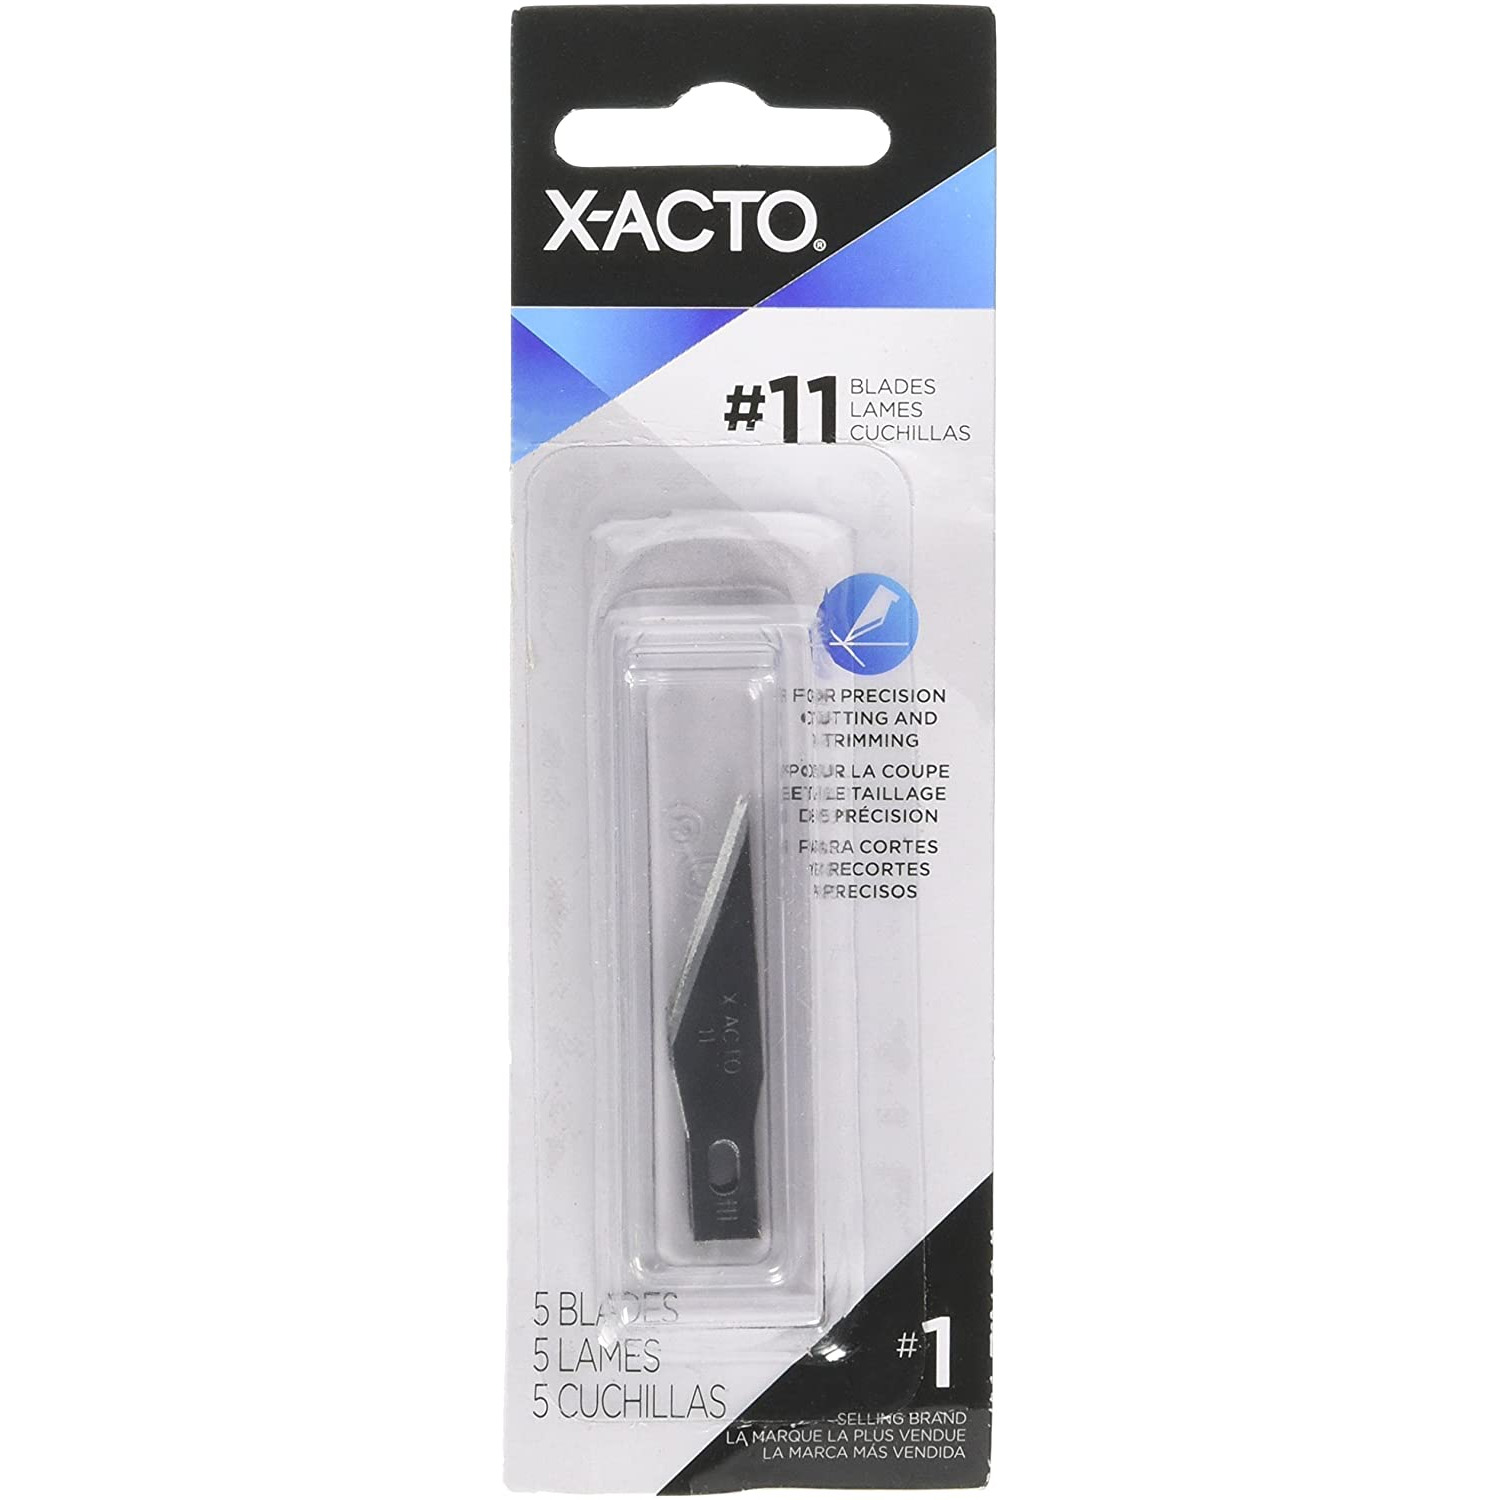 X-ACTO KNIFE REFILL BLADES#11 for #1 Knife (5)